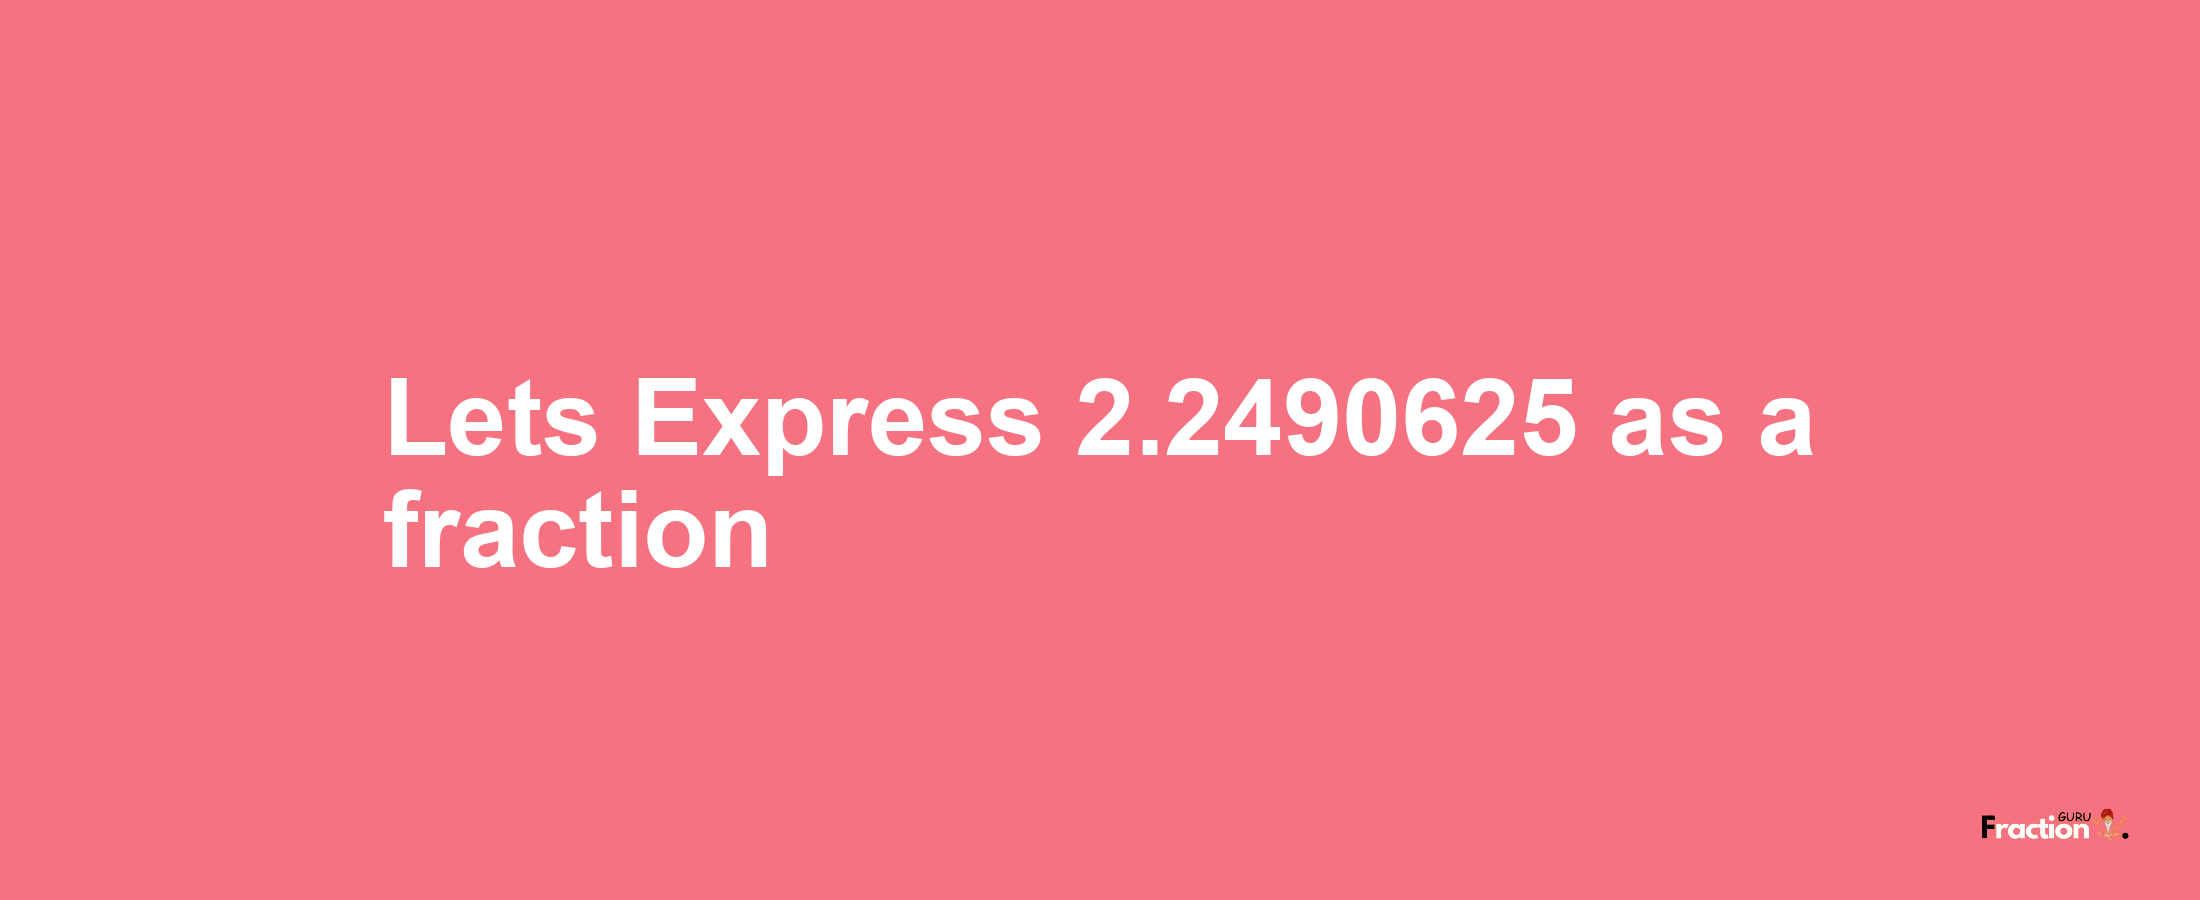 Lets Express 2.2490625 as afraction